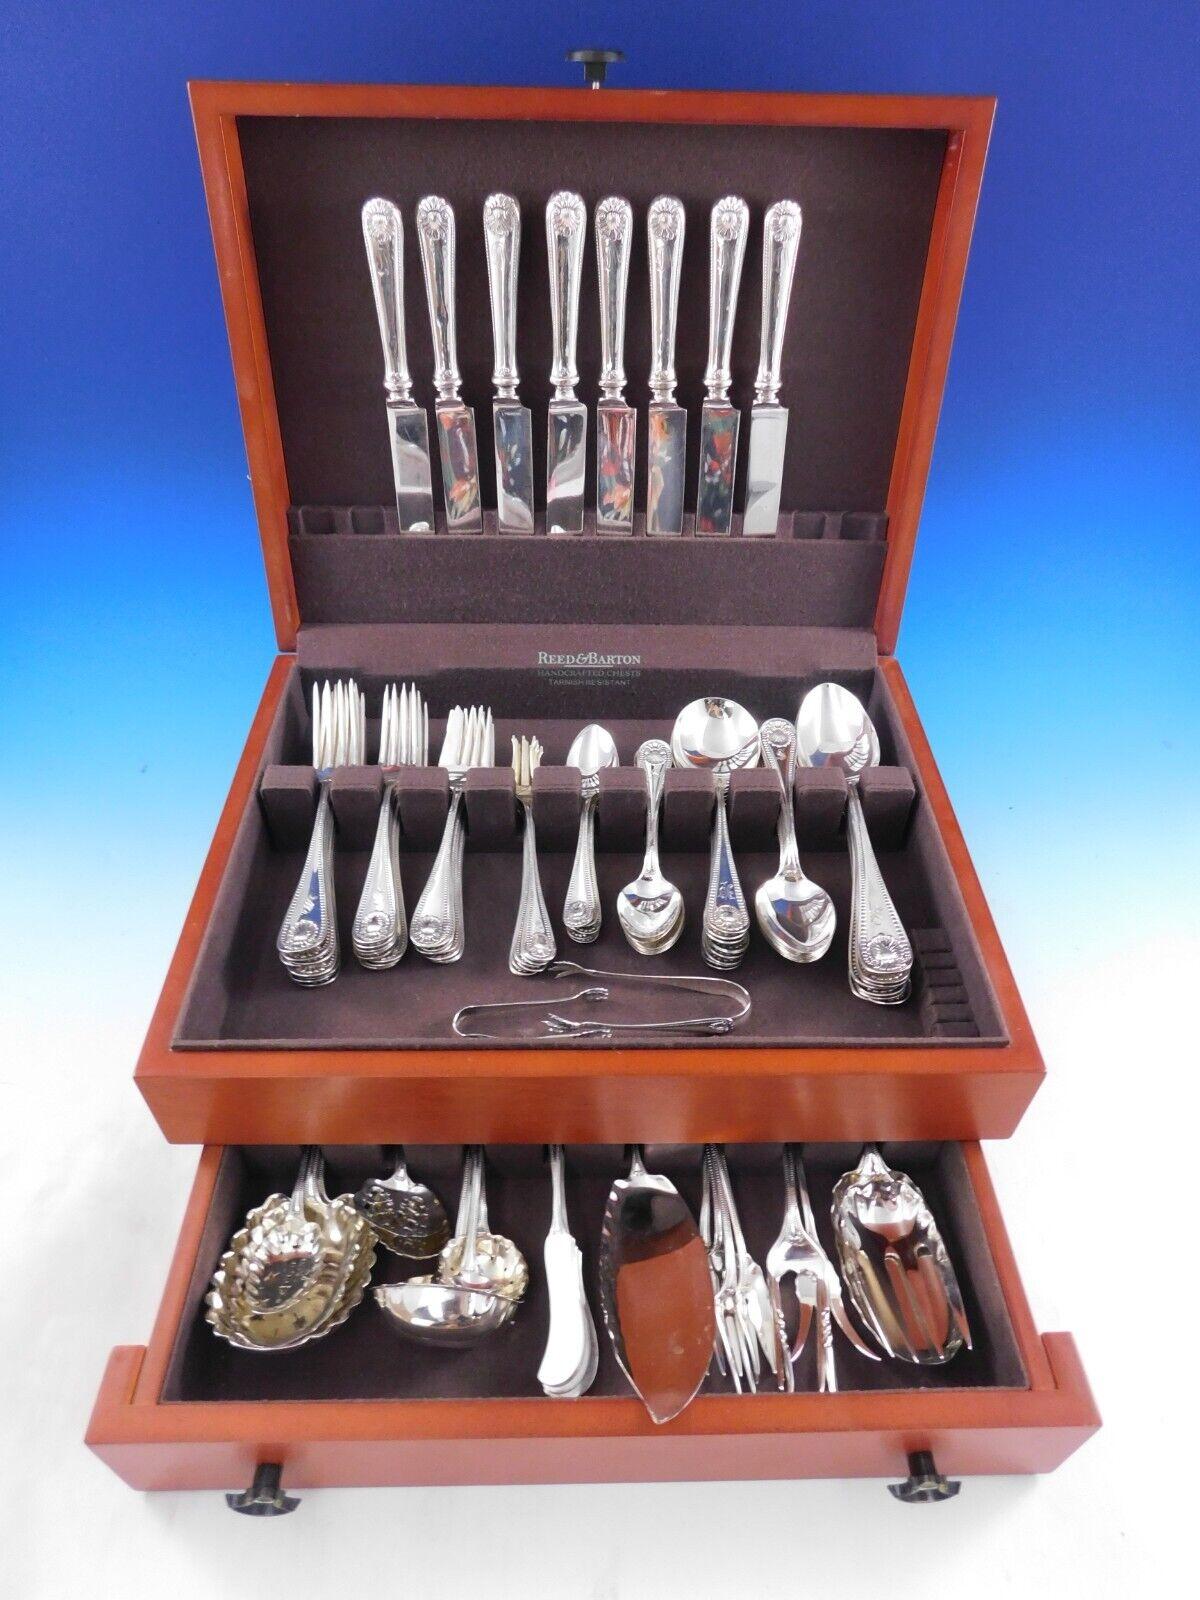 Dinner size Bead by Whiting, circa 1880, sterling silver Flatware set, 110 pieces. This set includes:

8 Dinner Size Knives with blunt plated blades, 9 1/2